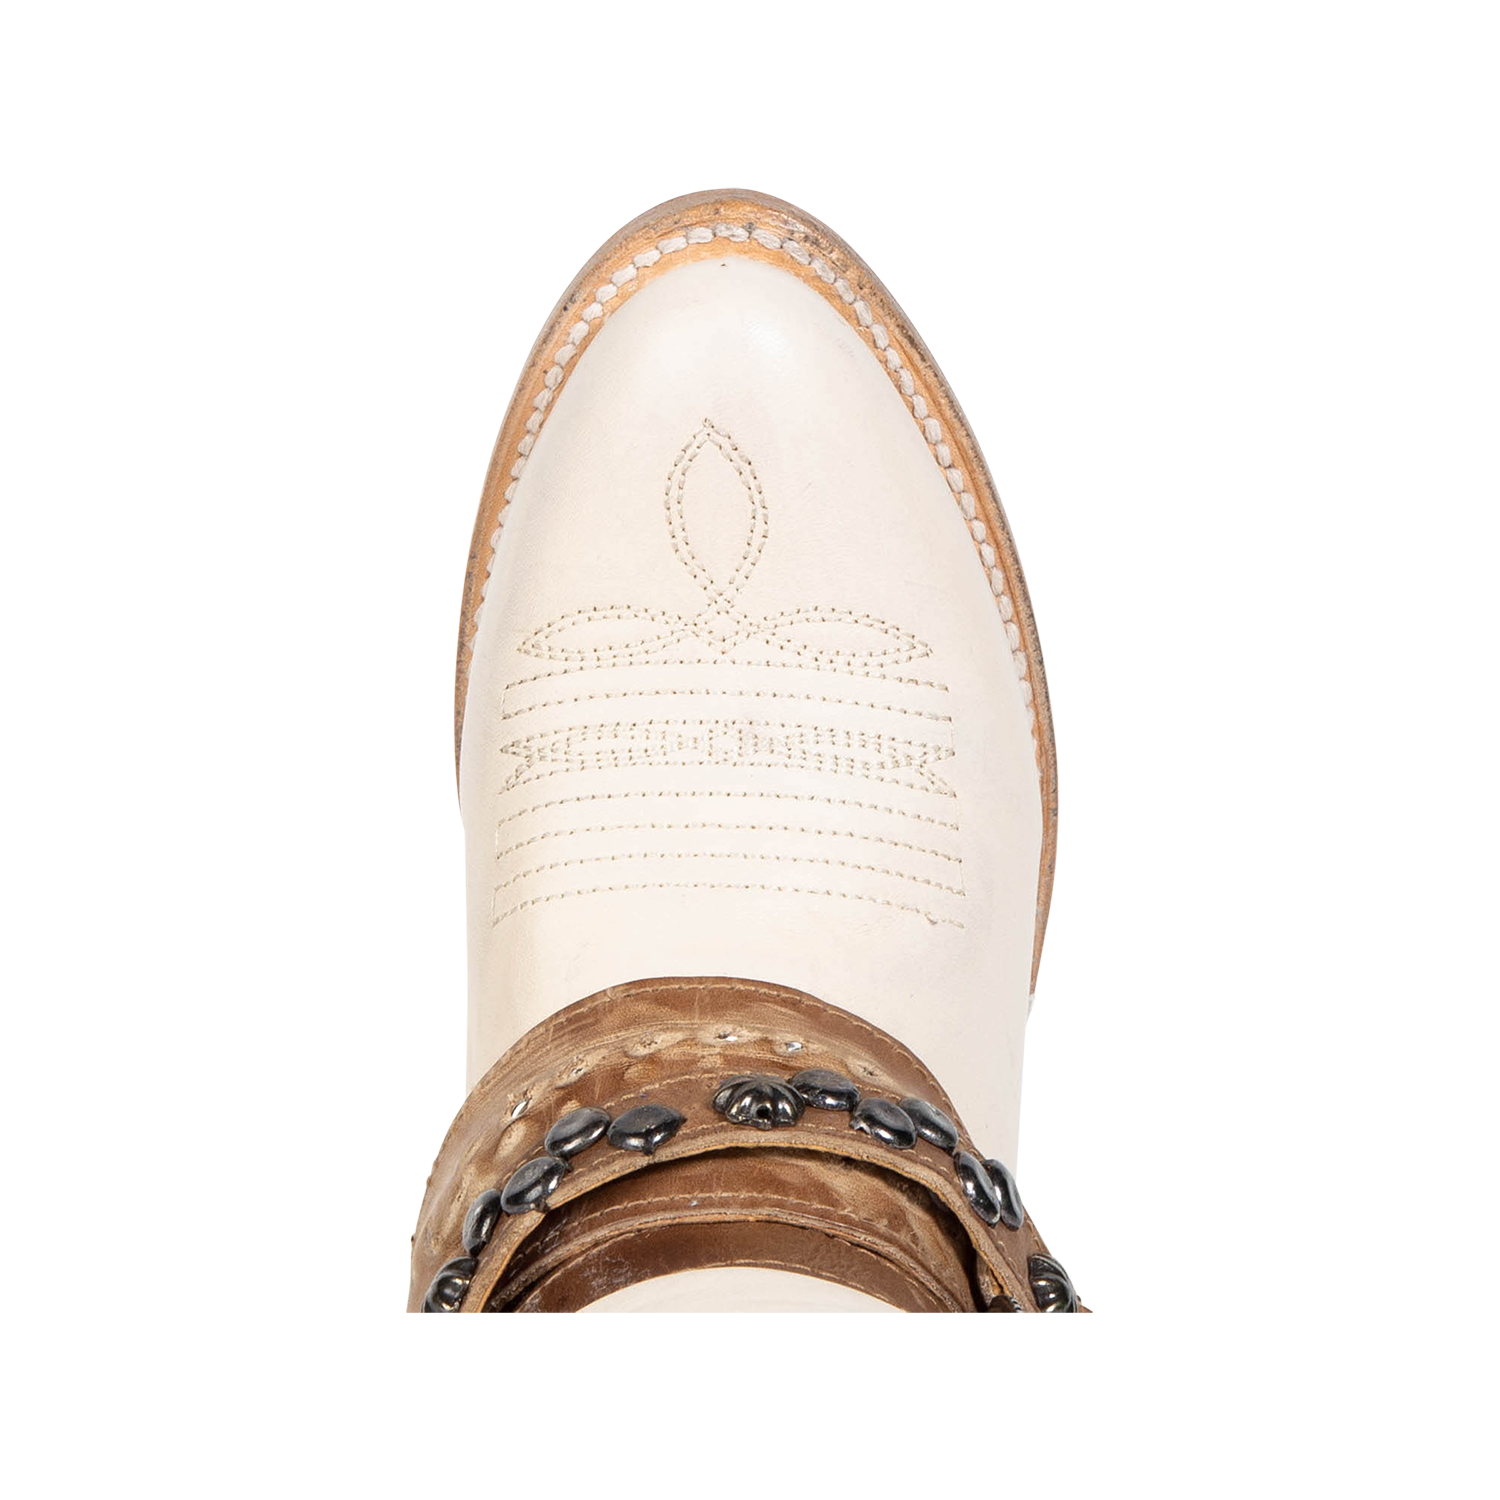 Top view showing round toe and stitch detailing on FREEBIRD women's Rodondo beige boot